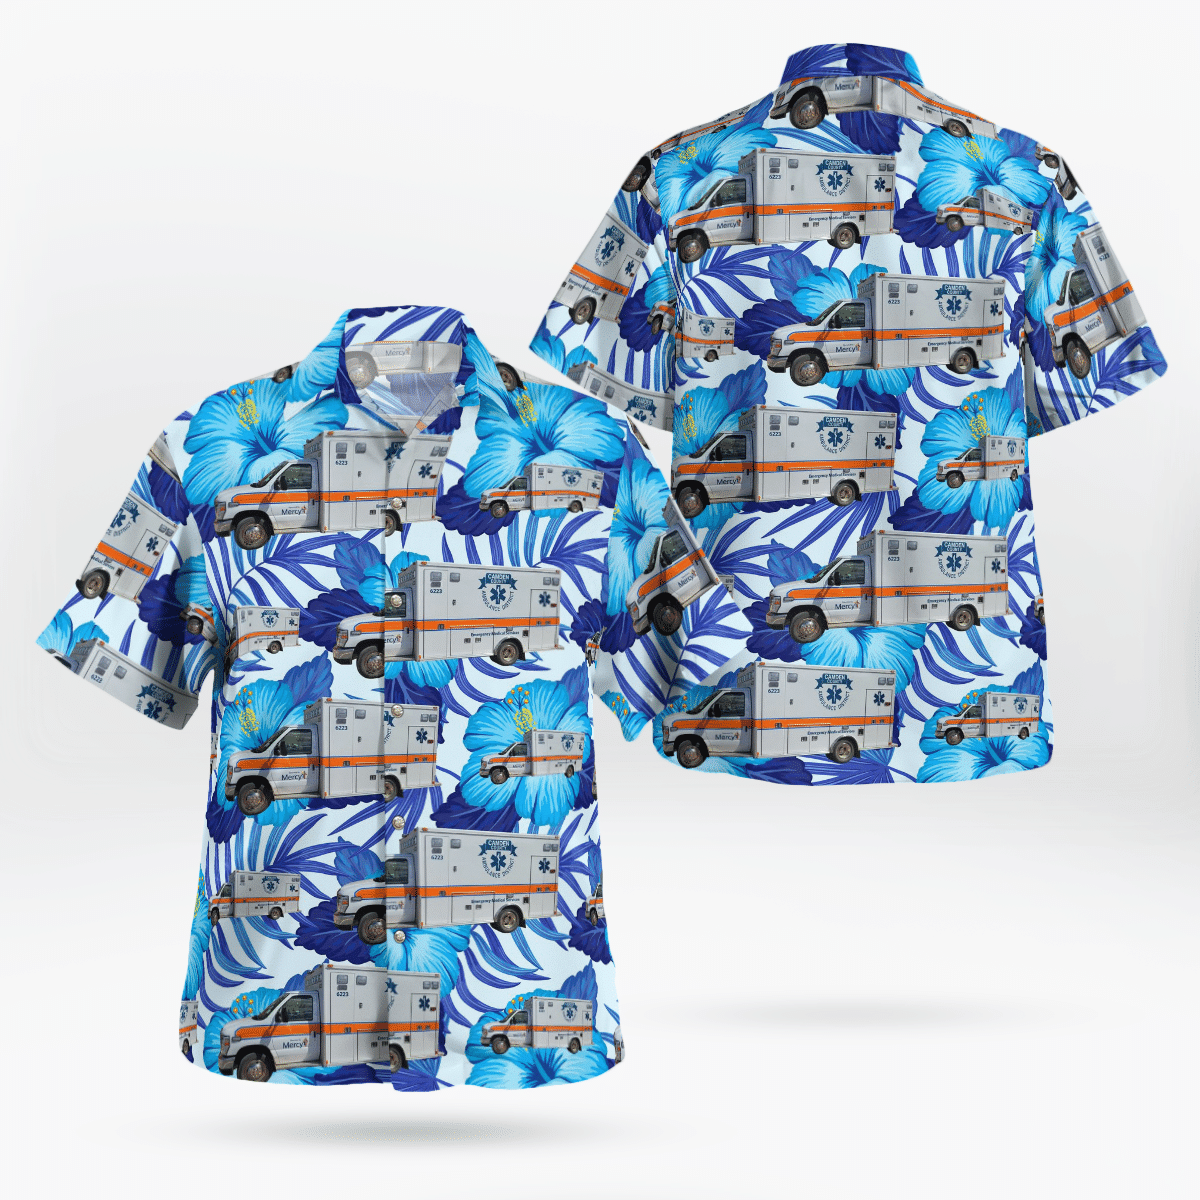 If you are in need of a new summertime look, pick up this Hawaiian shirt 156